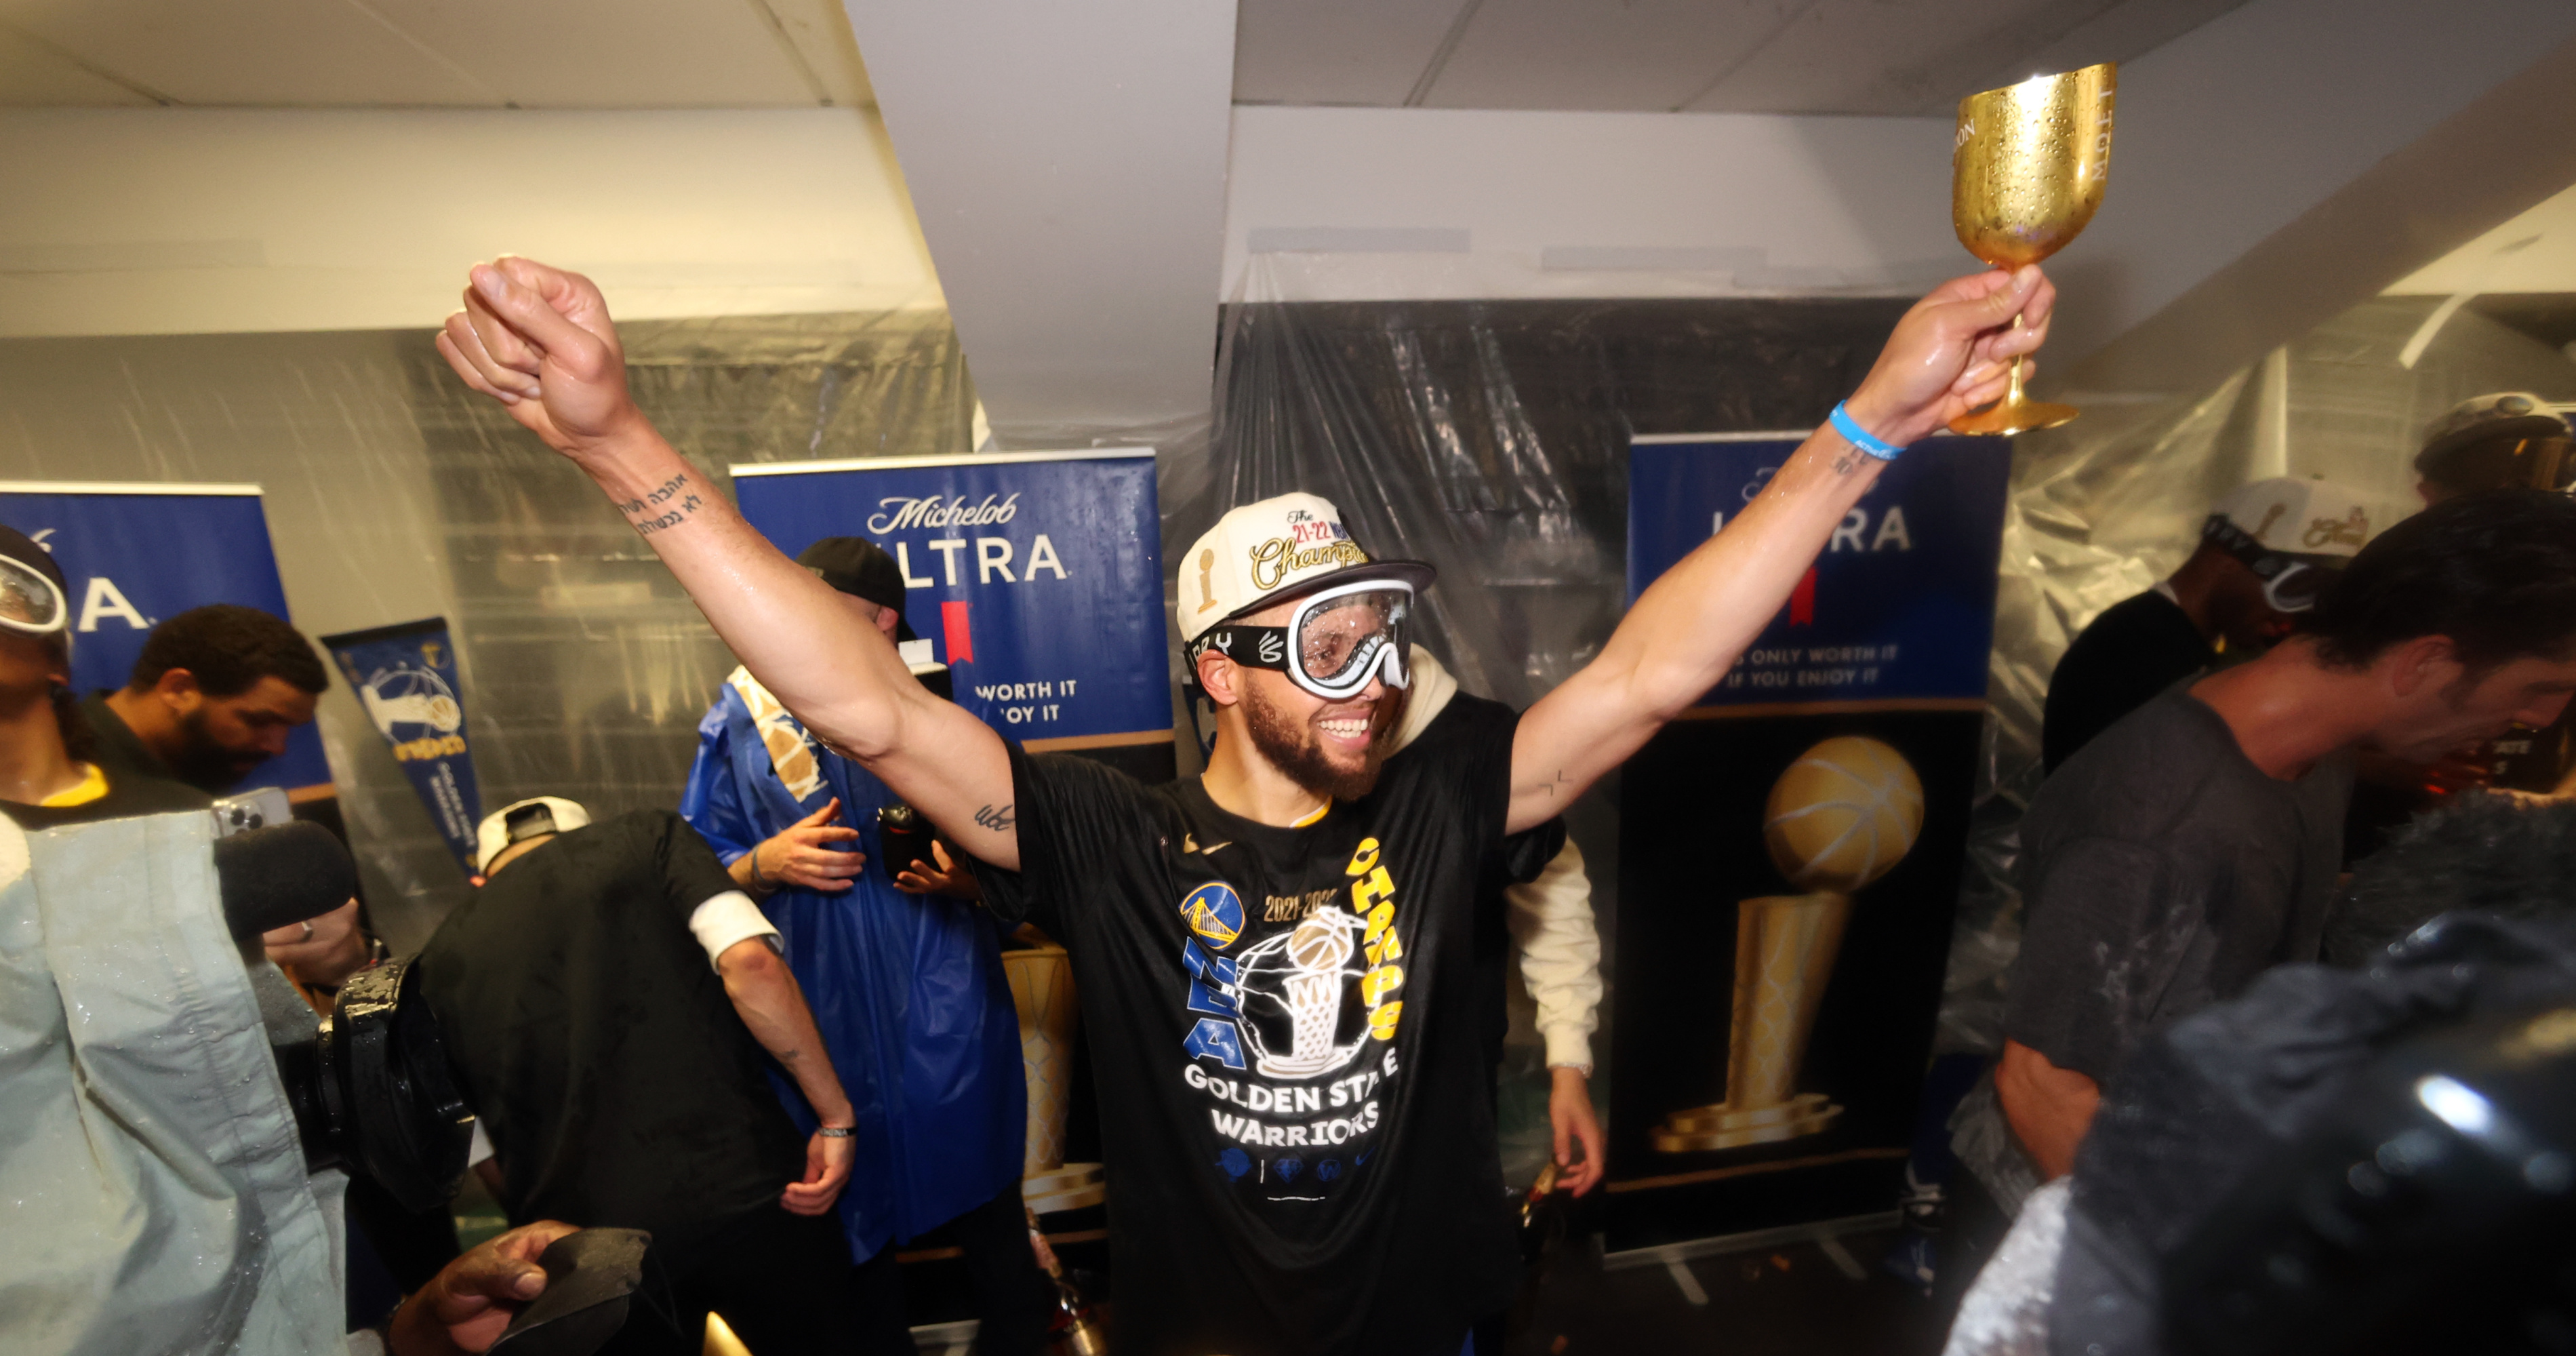 Steph Curry's brilliant Game 4 should silence his haters forever